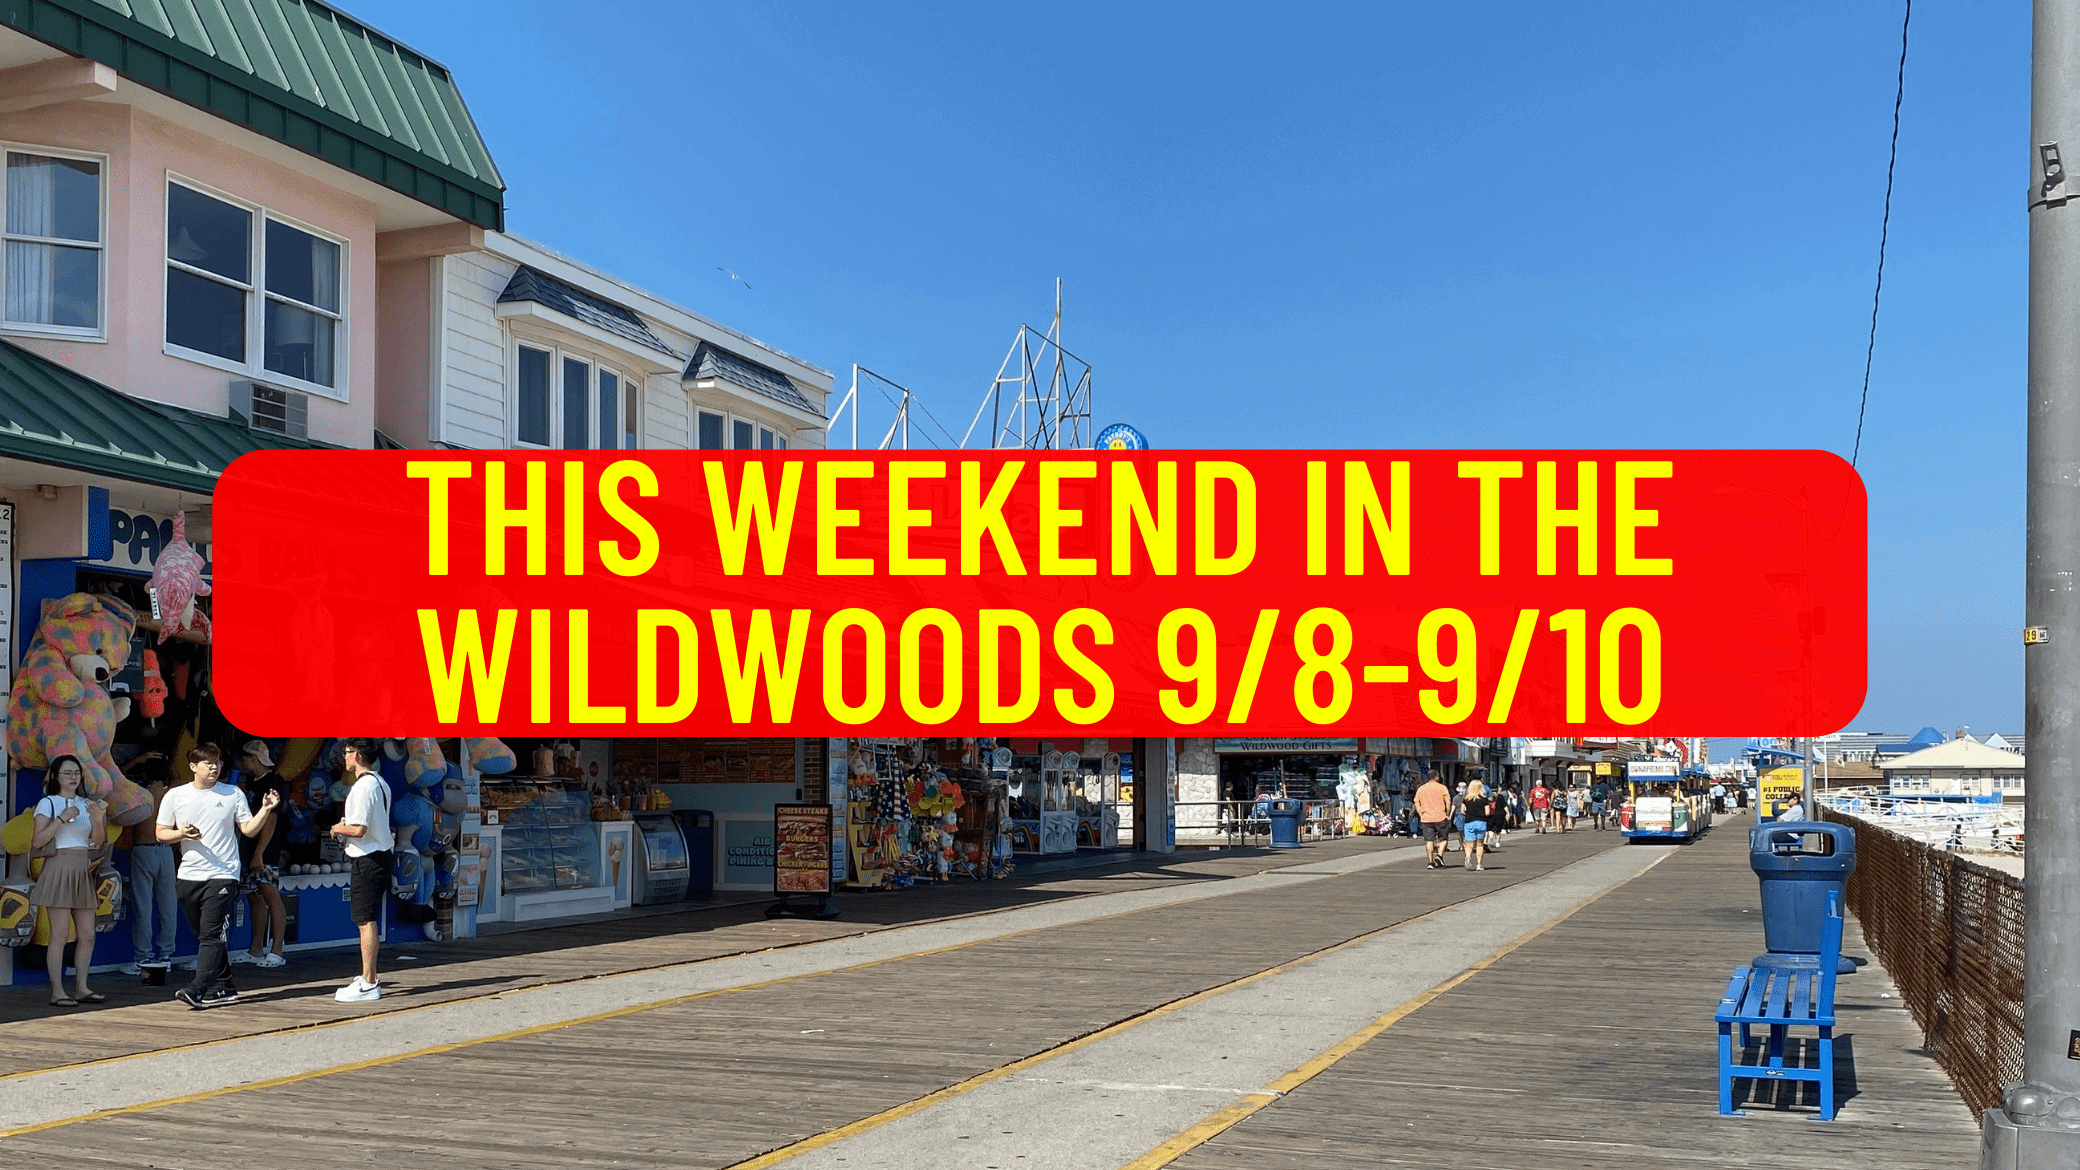 This Weekend in the Wildwoods - Sept 8th-10th